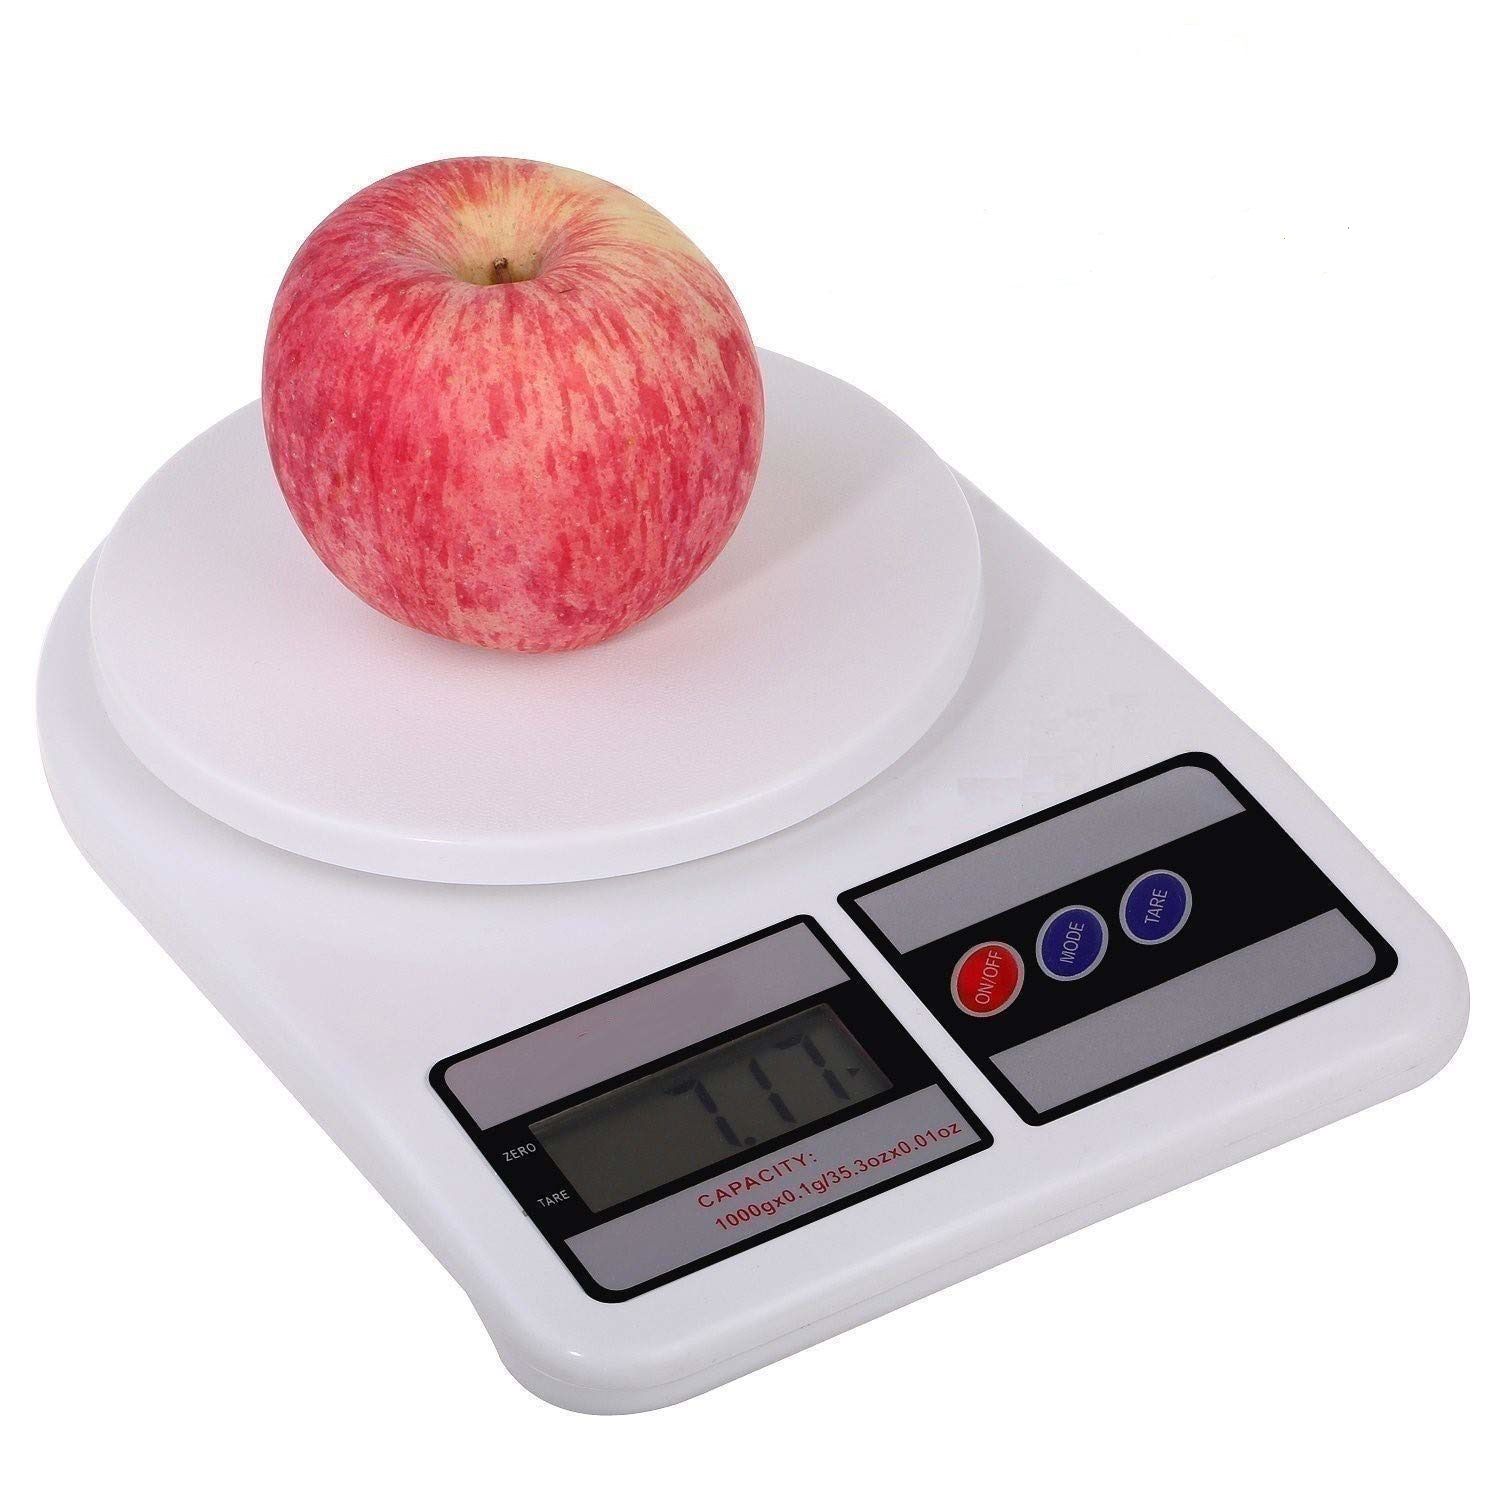 ZahabElectronic Kitchen Digital Weighing Scale Machine Measure for